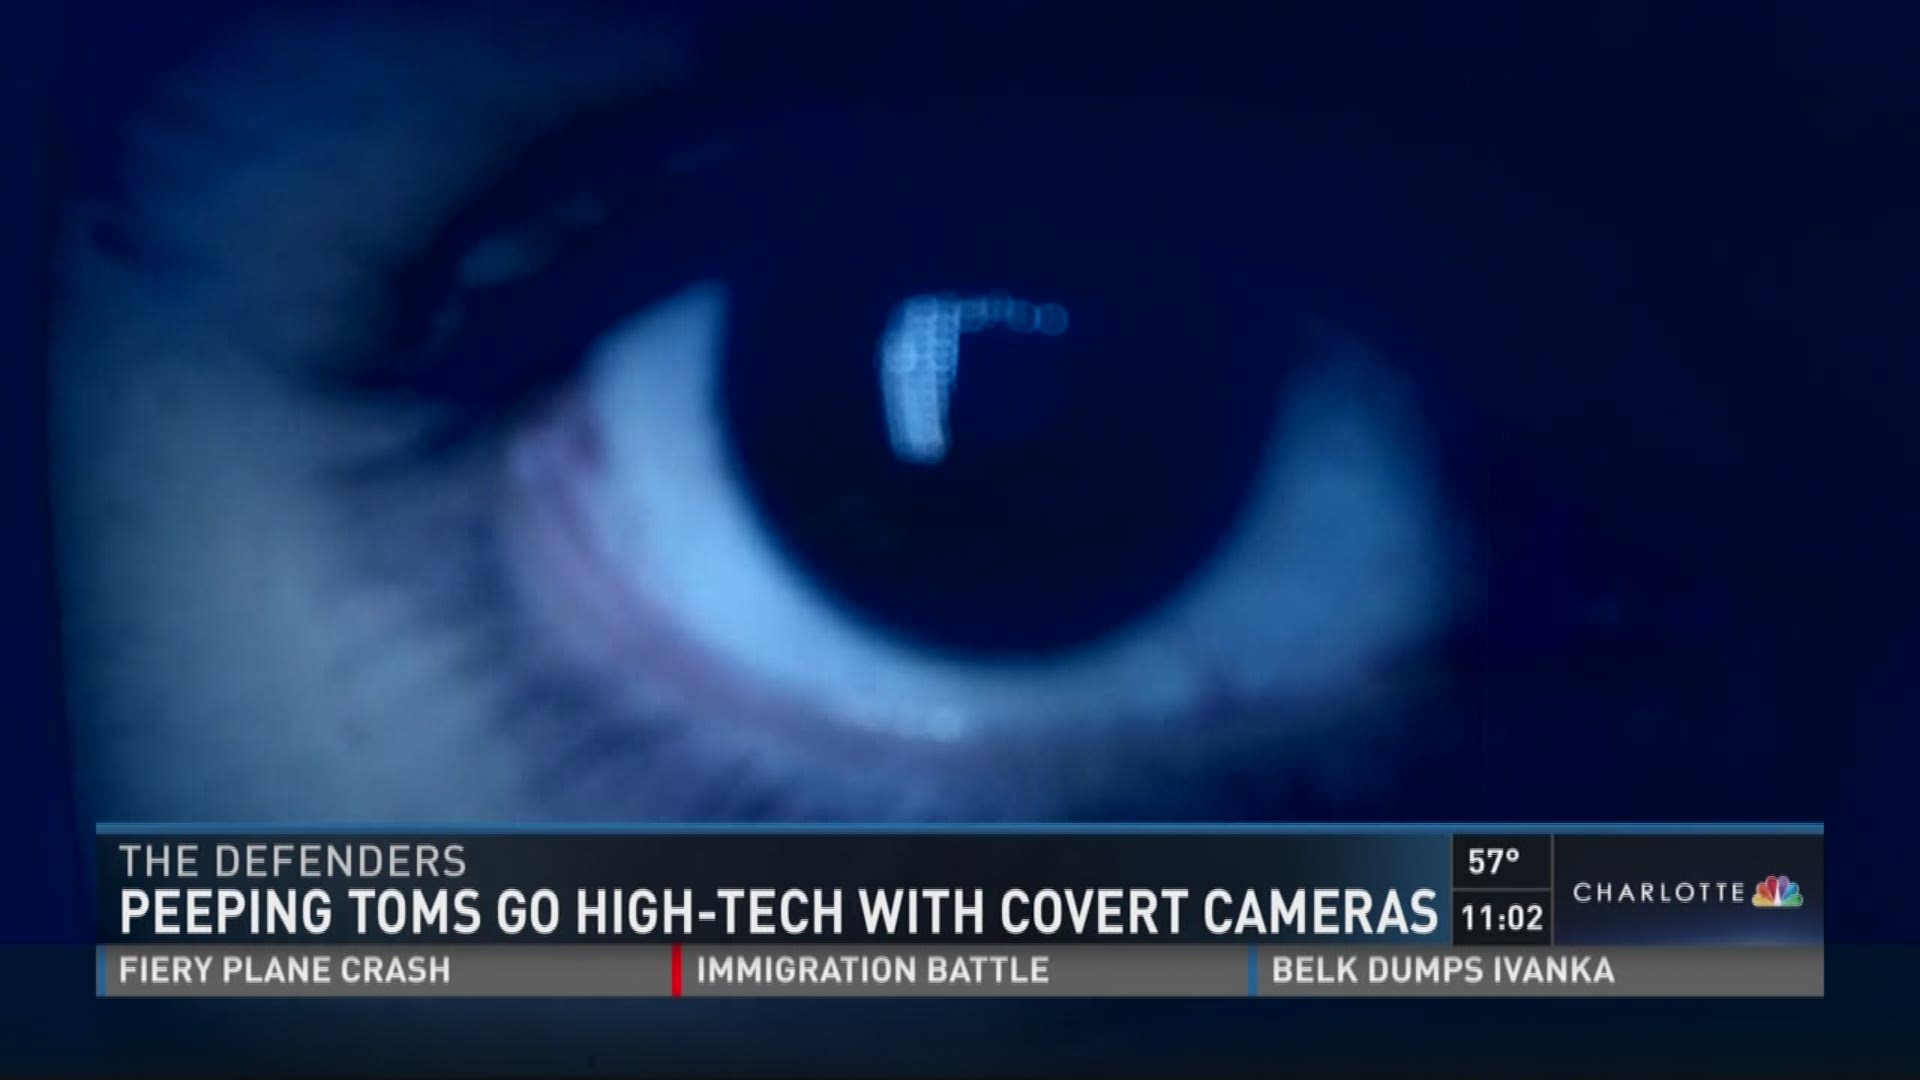 Peeping Toms go high-tech with covert cameras